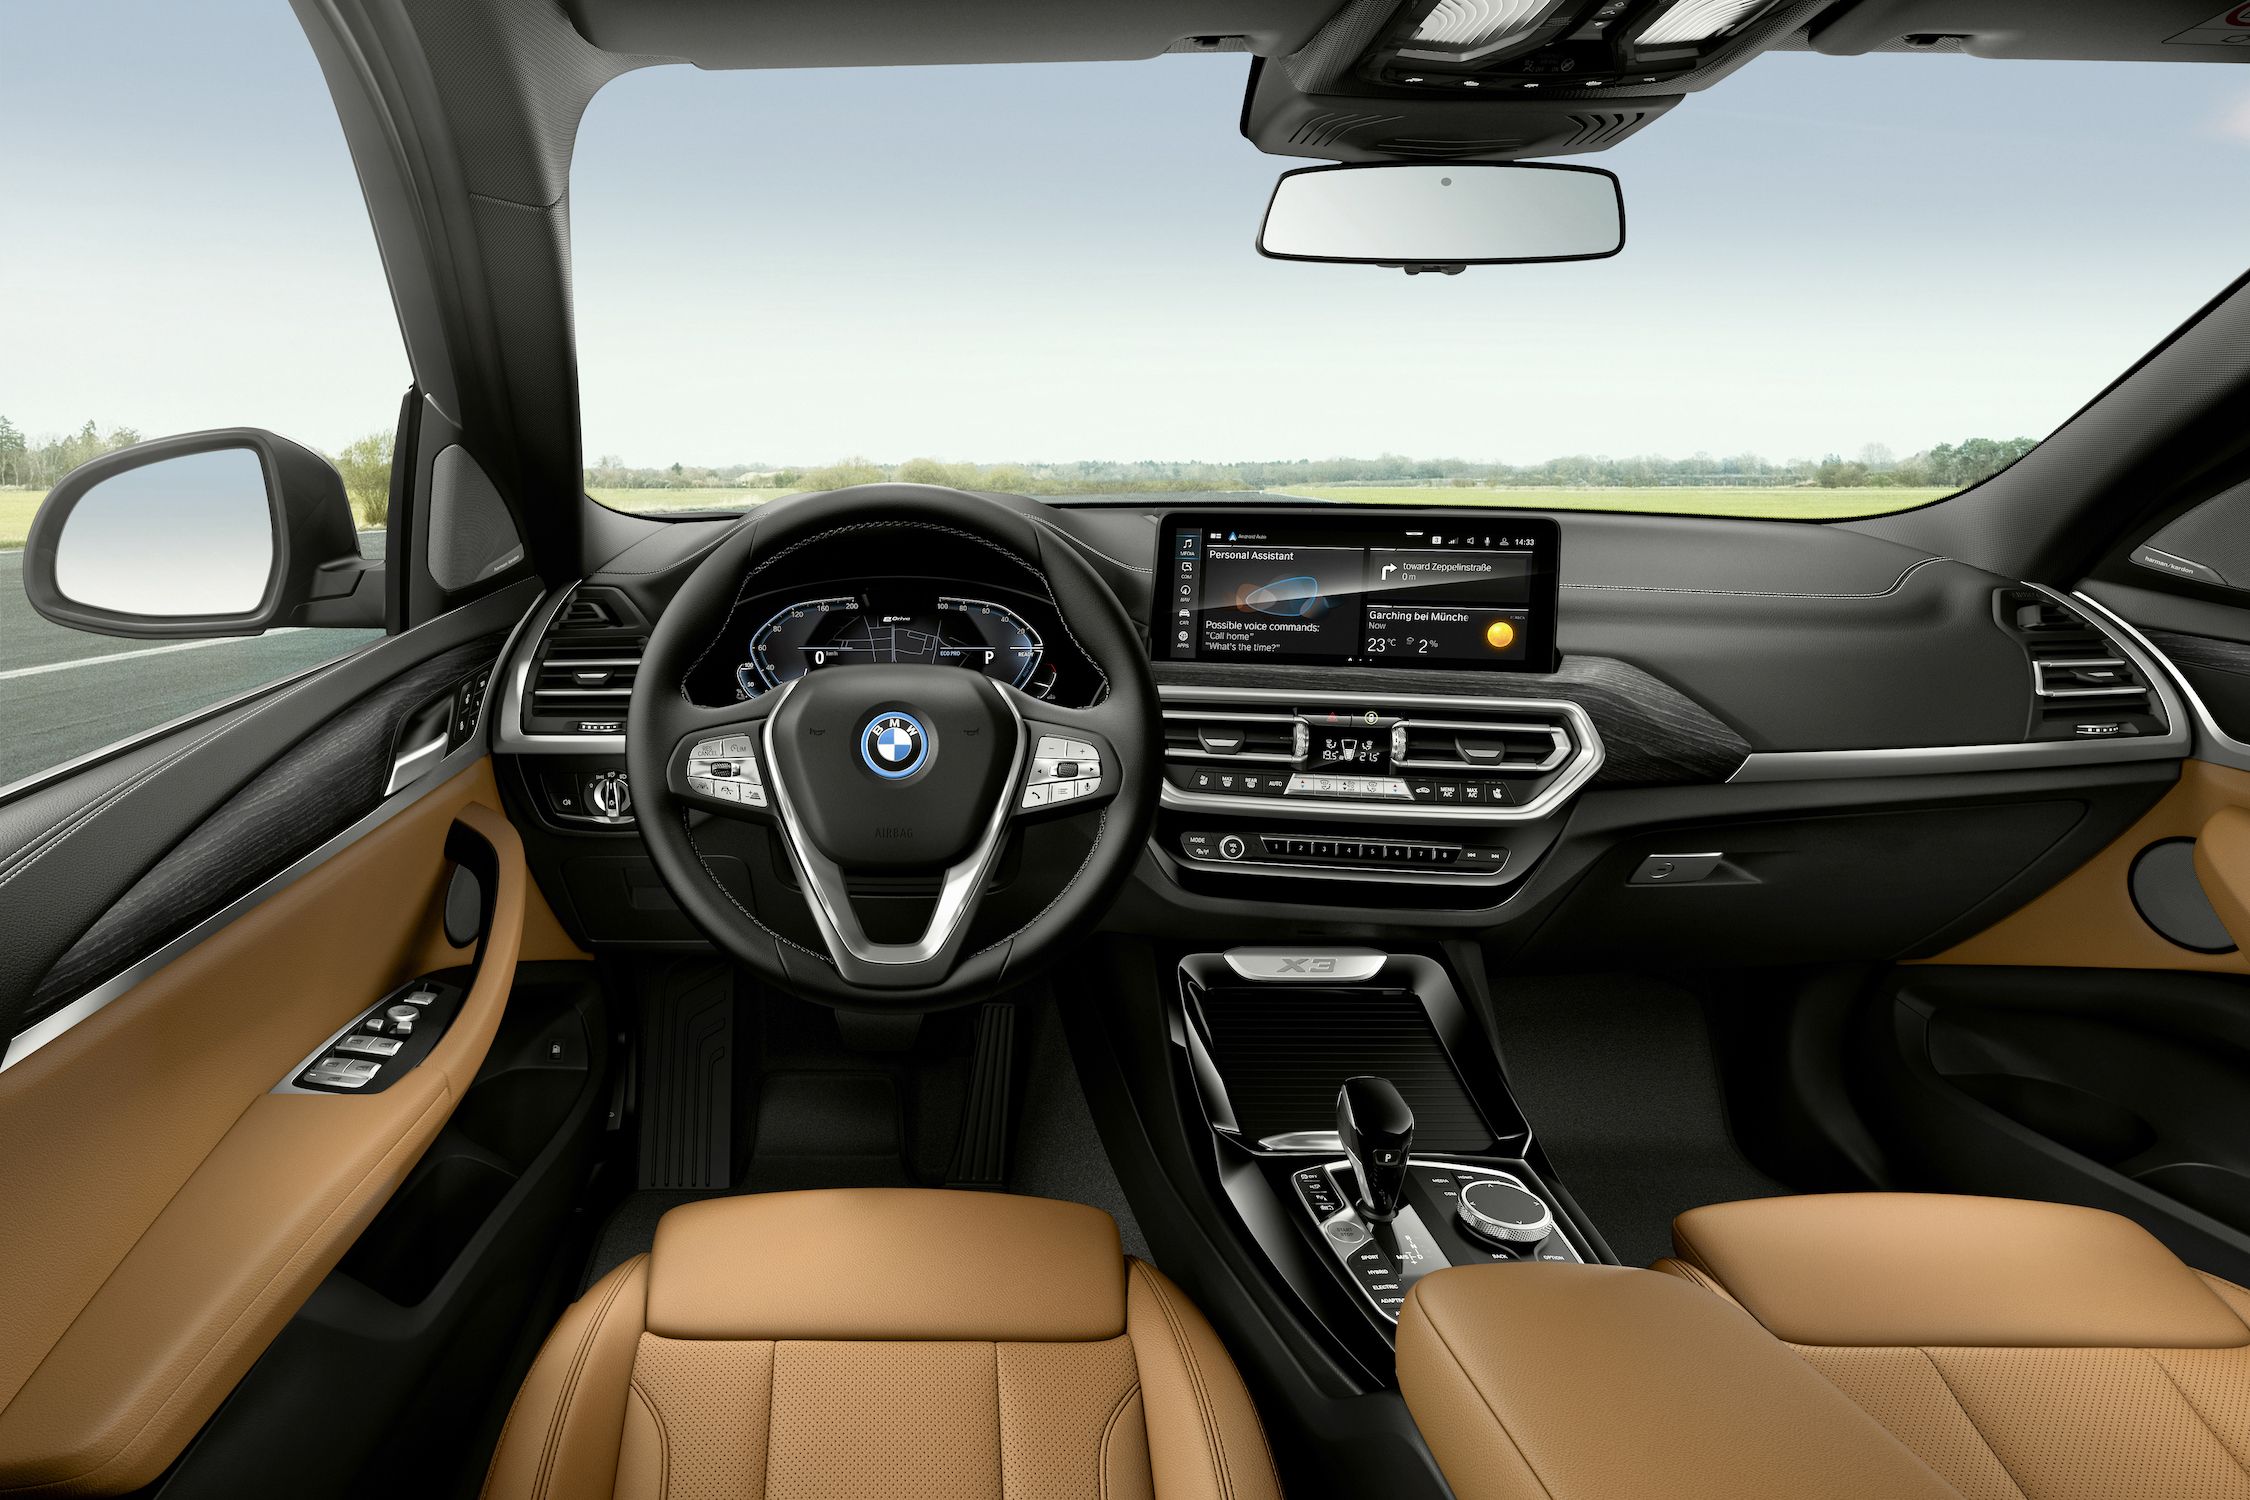 2021 BMW X3 Price, Value, Ratings & Reviews